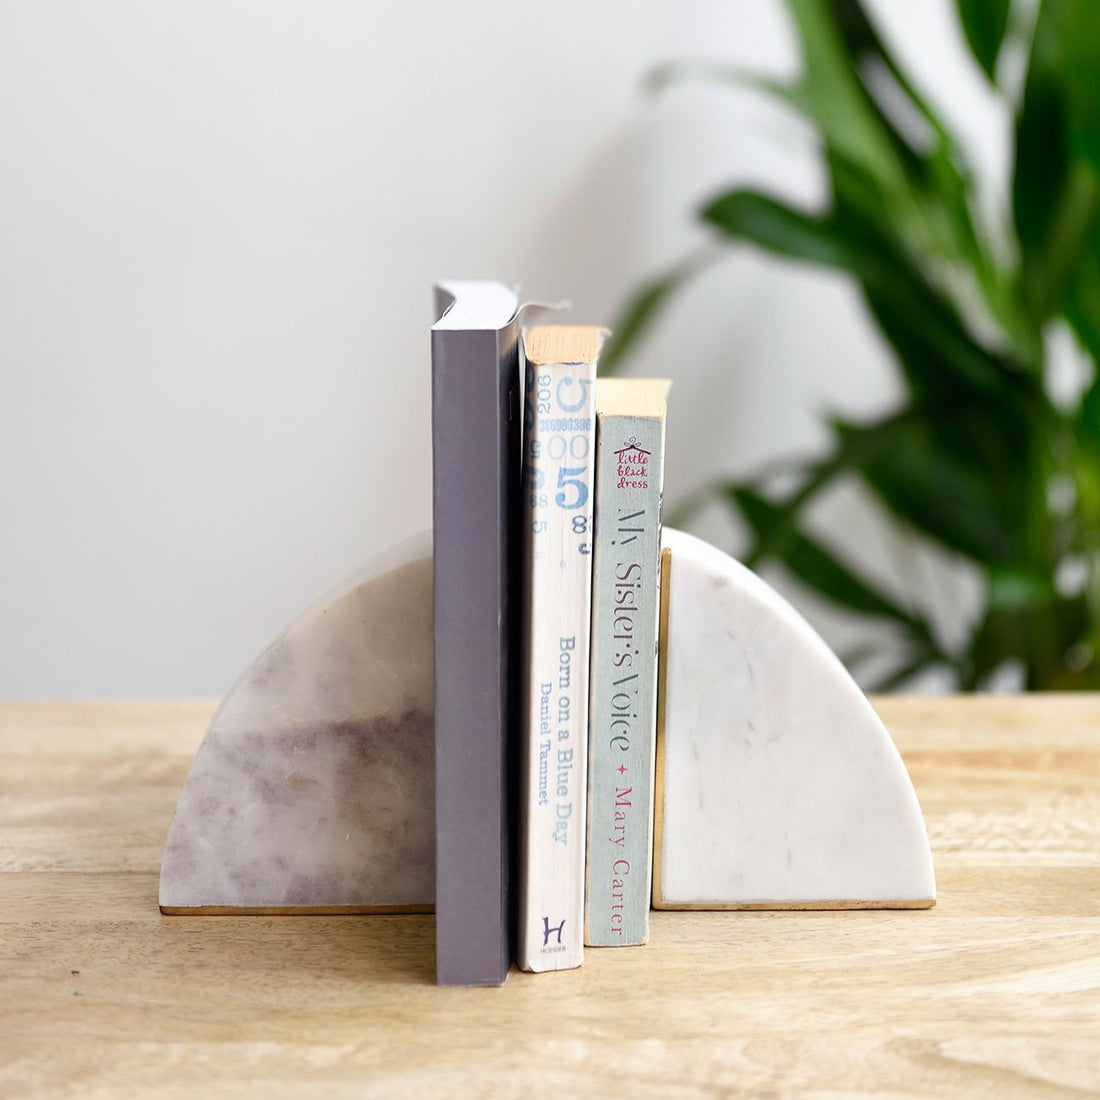 Geometric Marble Bookends (Set of 2)